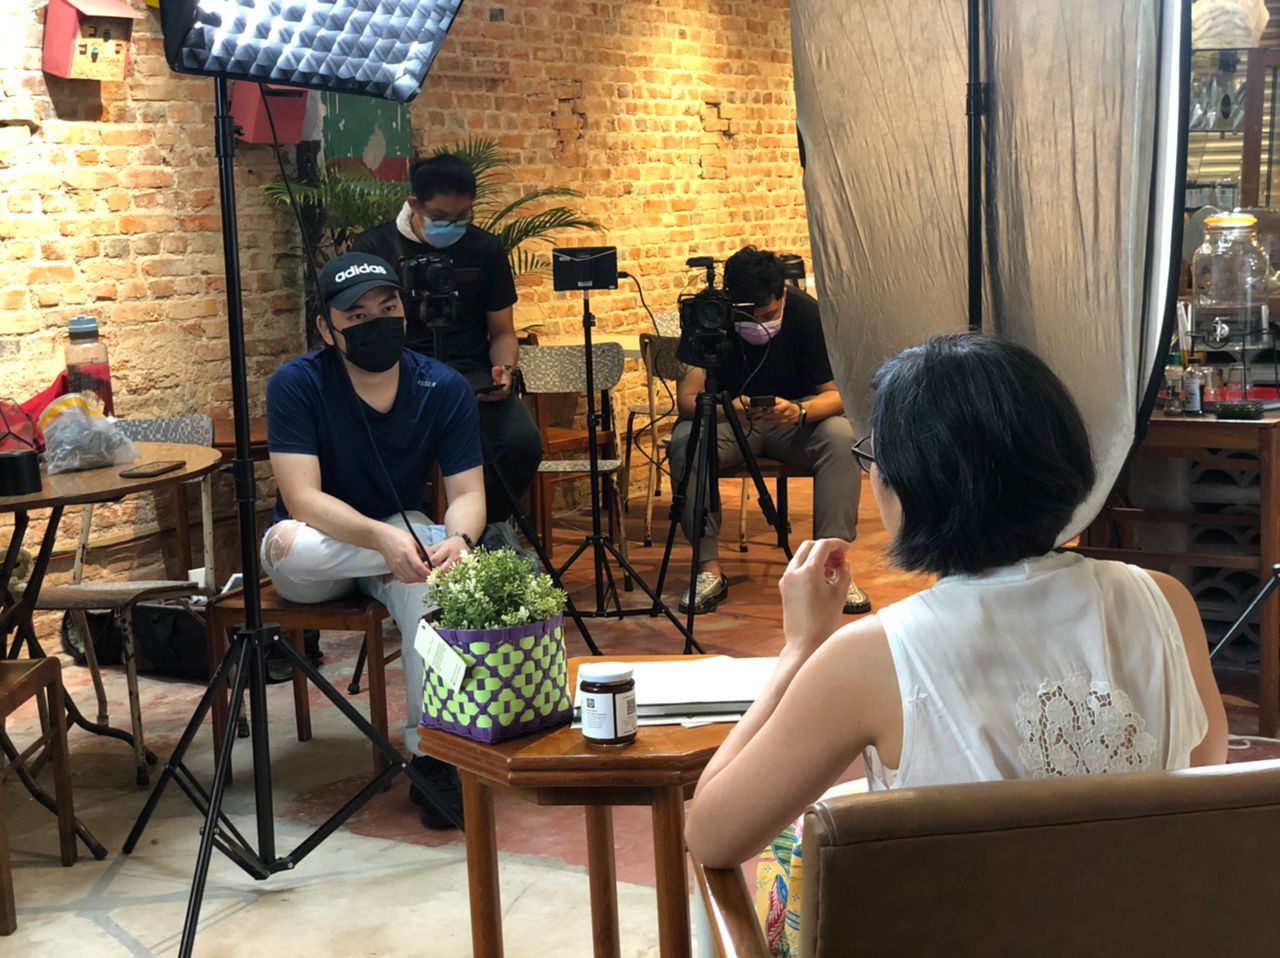 Illimate Creative creative director and Melaka-born Alex Loh pictured behind the scenes interviewing for his documentary. – Pic courtesy of Illimite Creative/Alex Loh